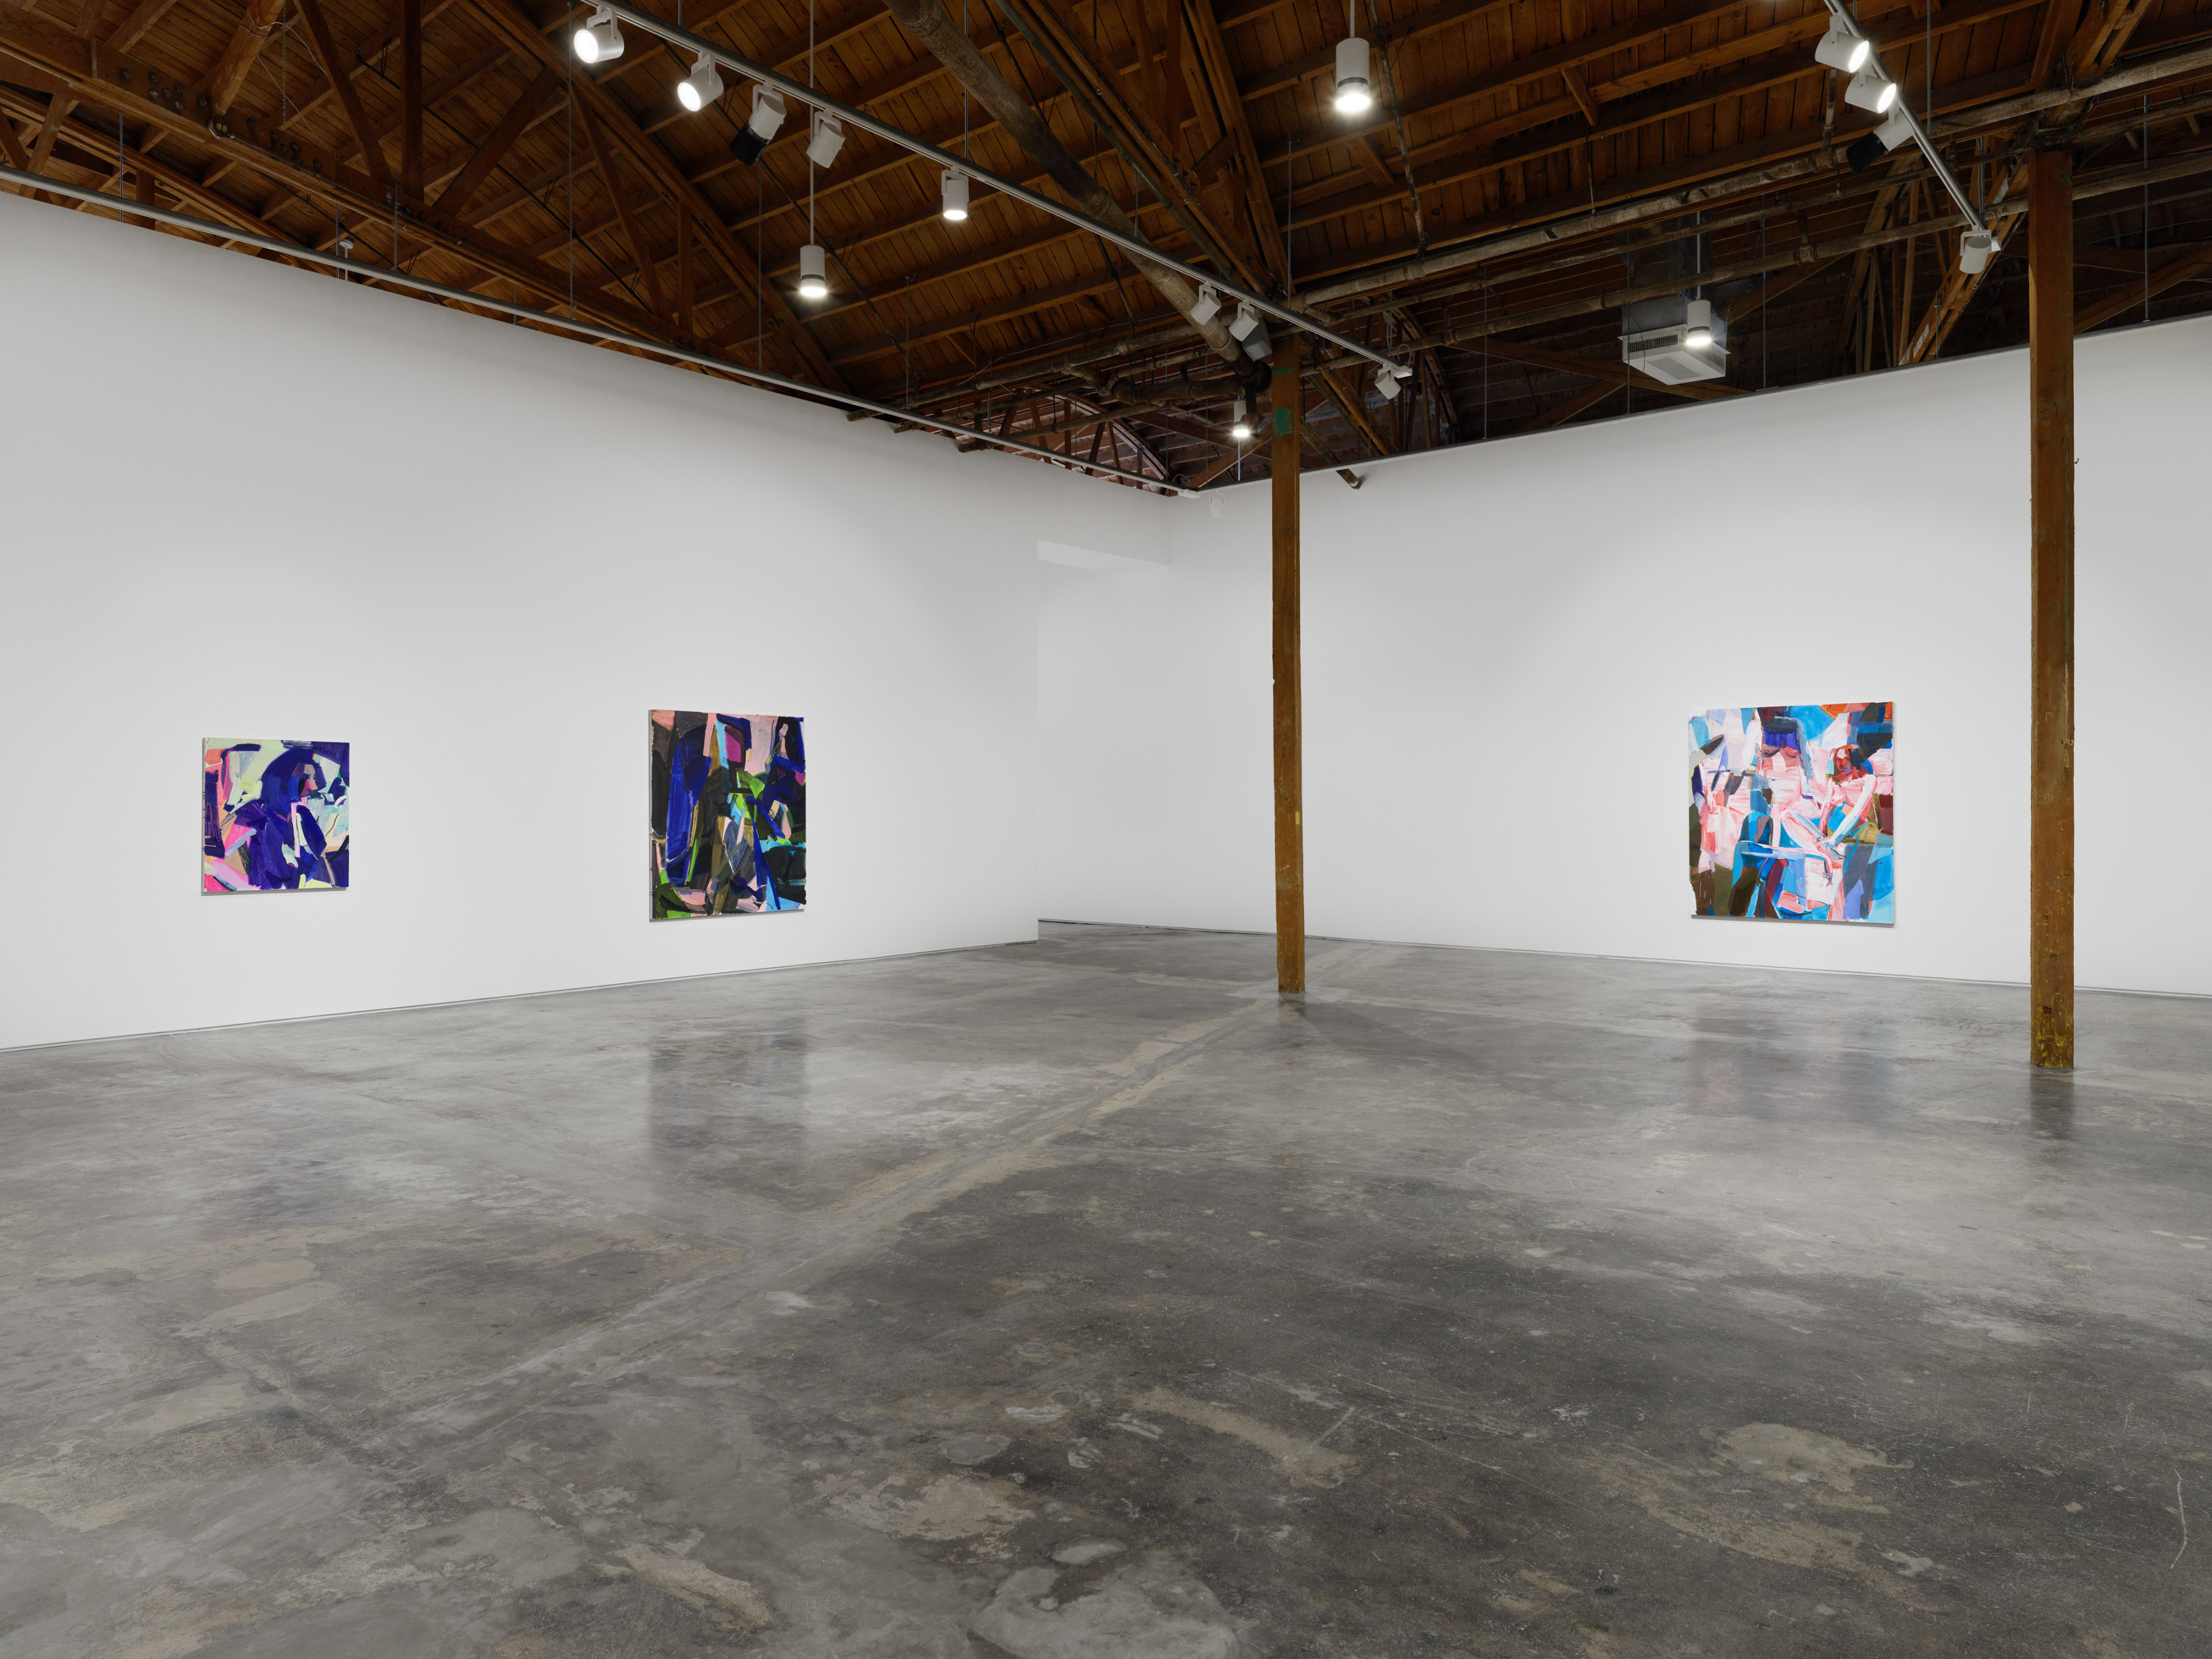 Installation view of Sarah Awad's exhibition "To Hold a Thing" at Night Gallery